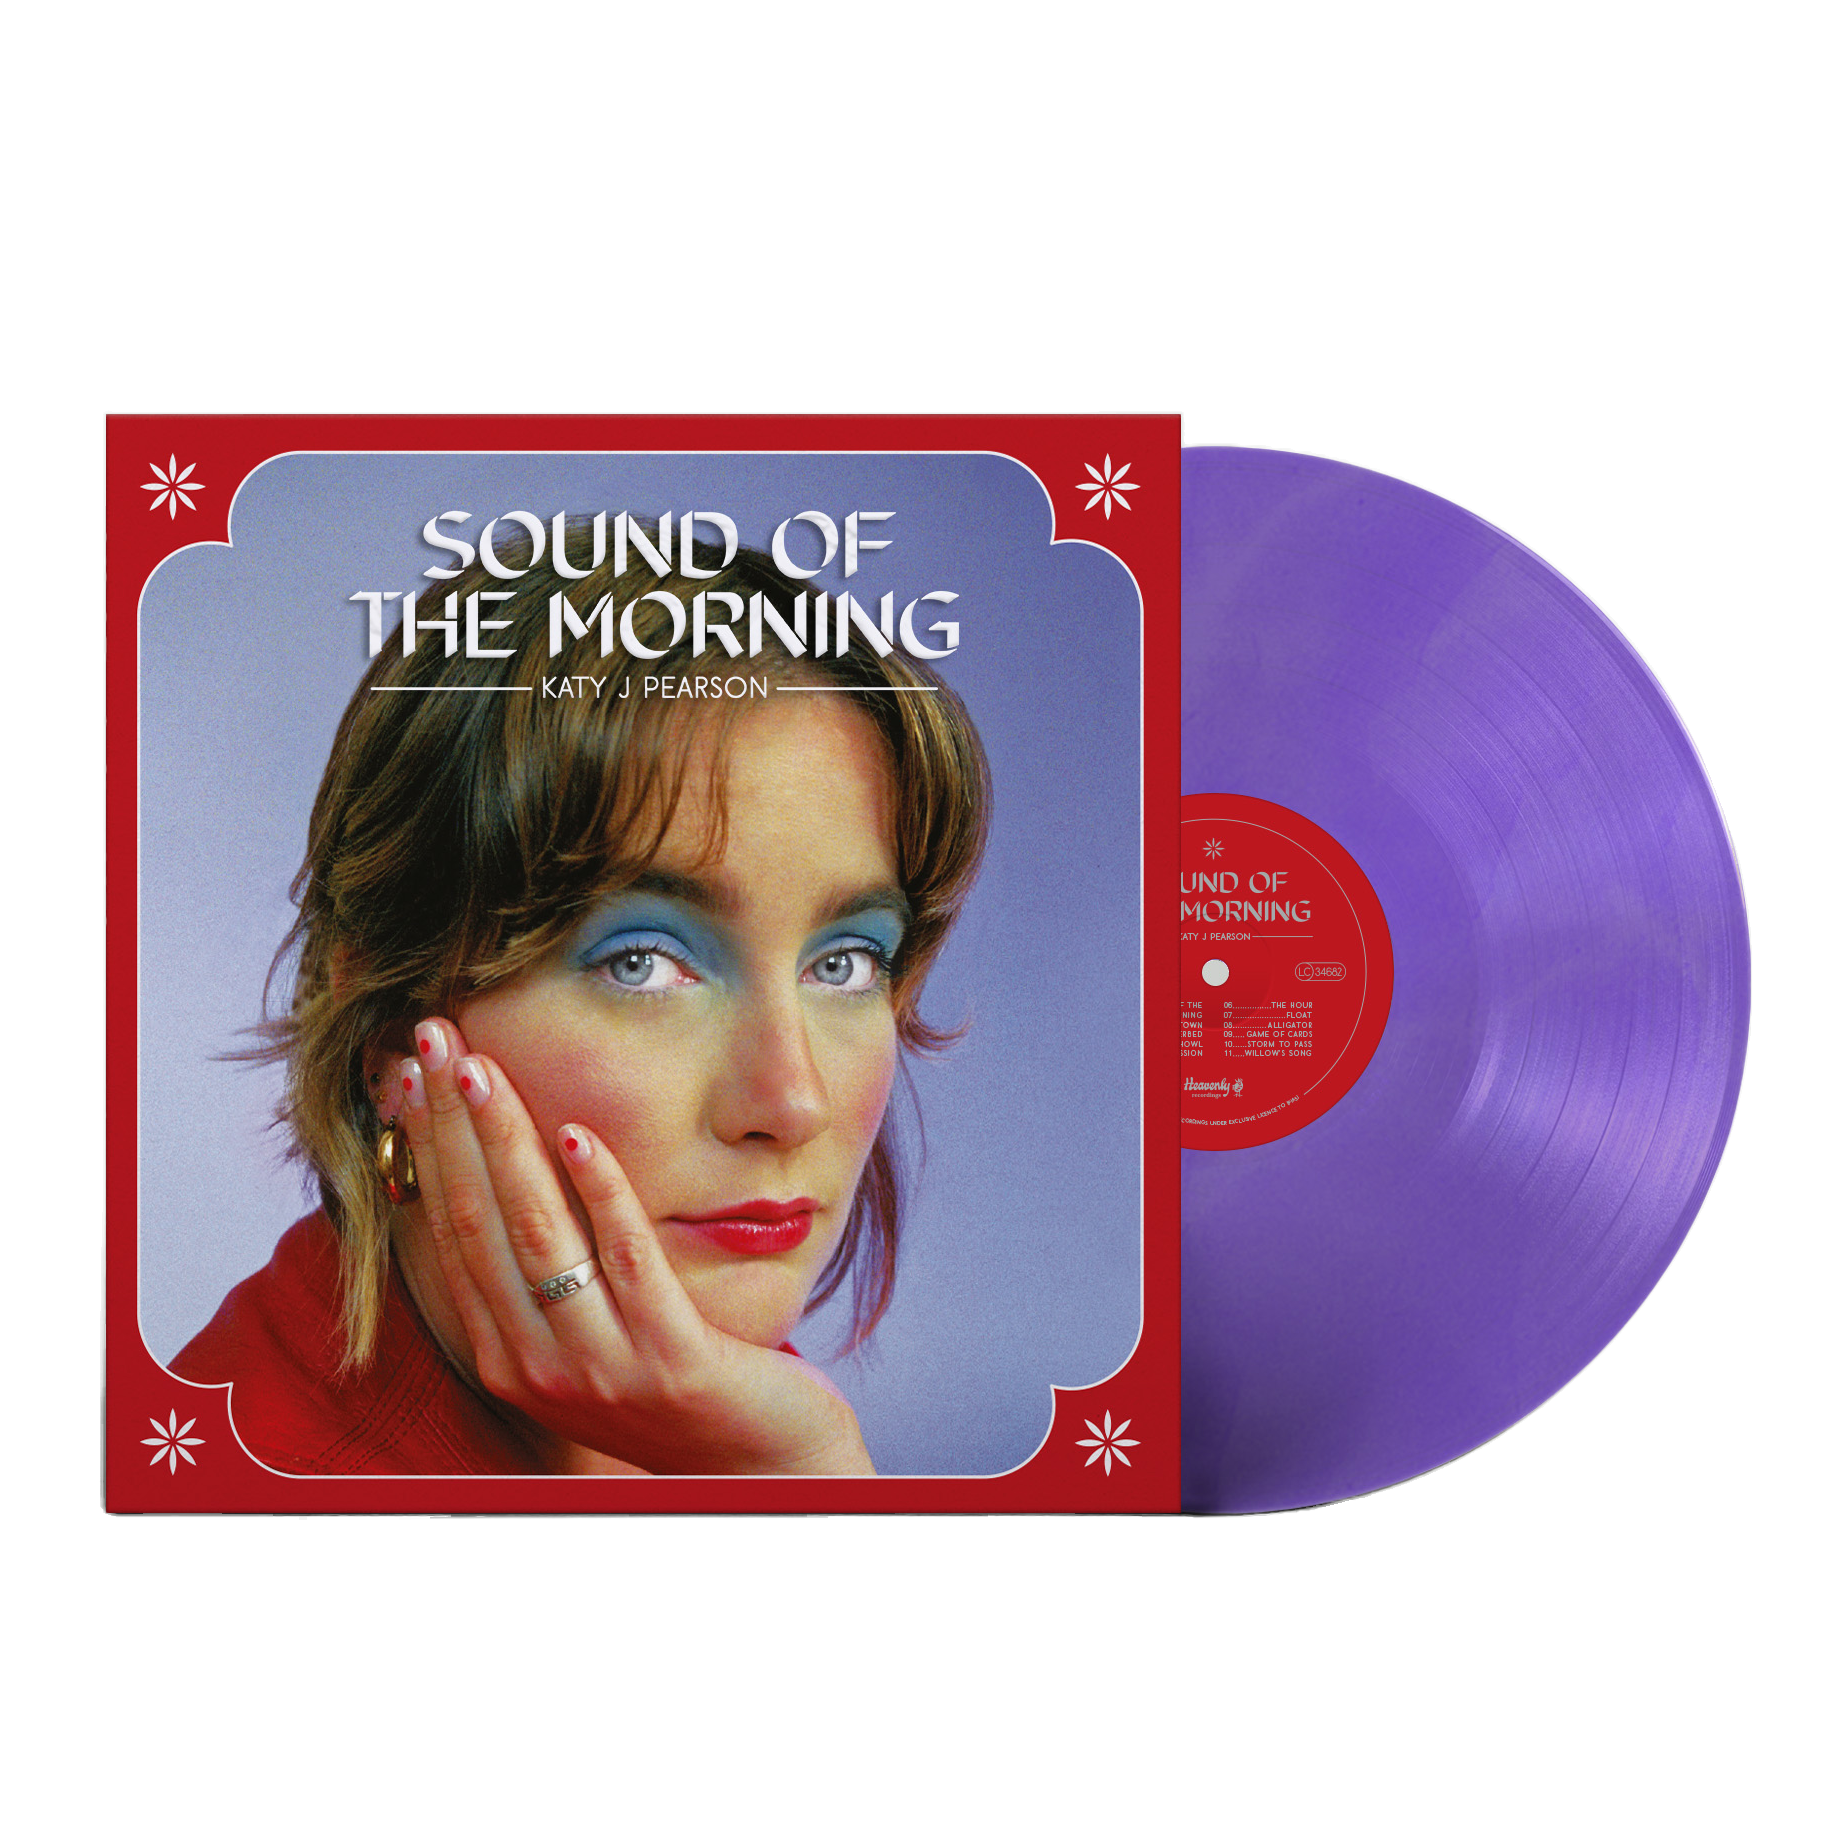 Katy J Pearson - Sound Of The Morning: Limited Marble Vinyl LP